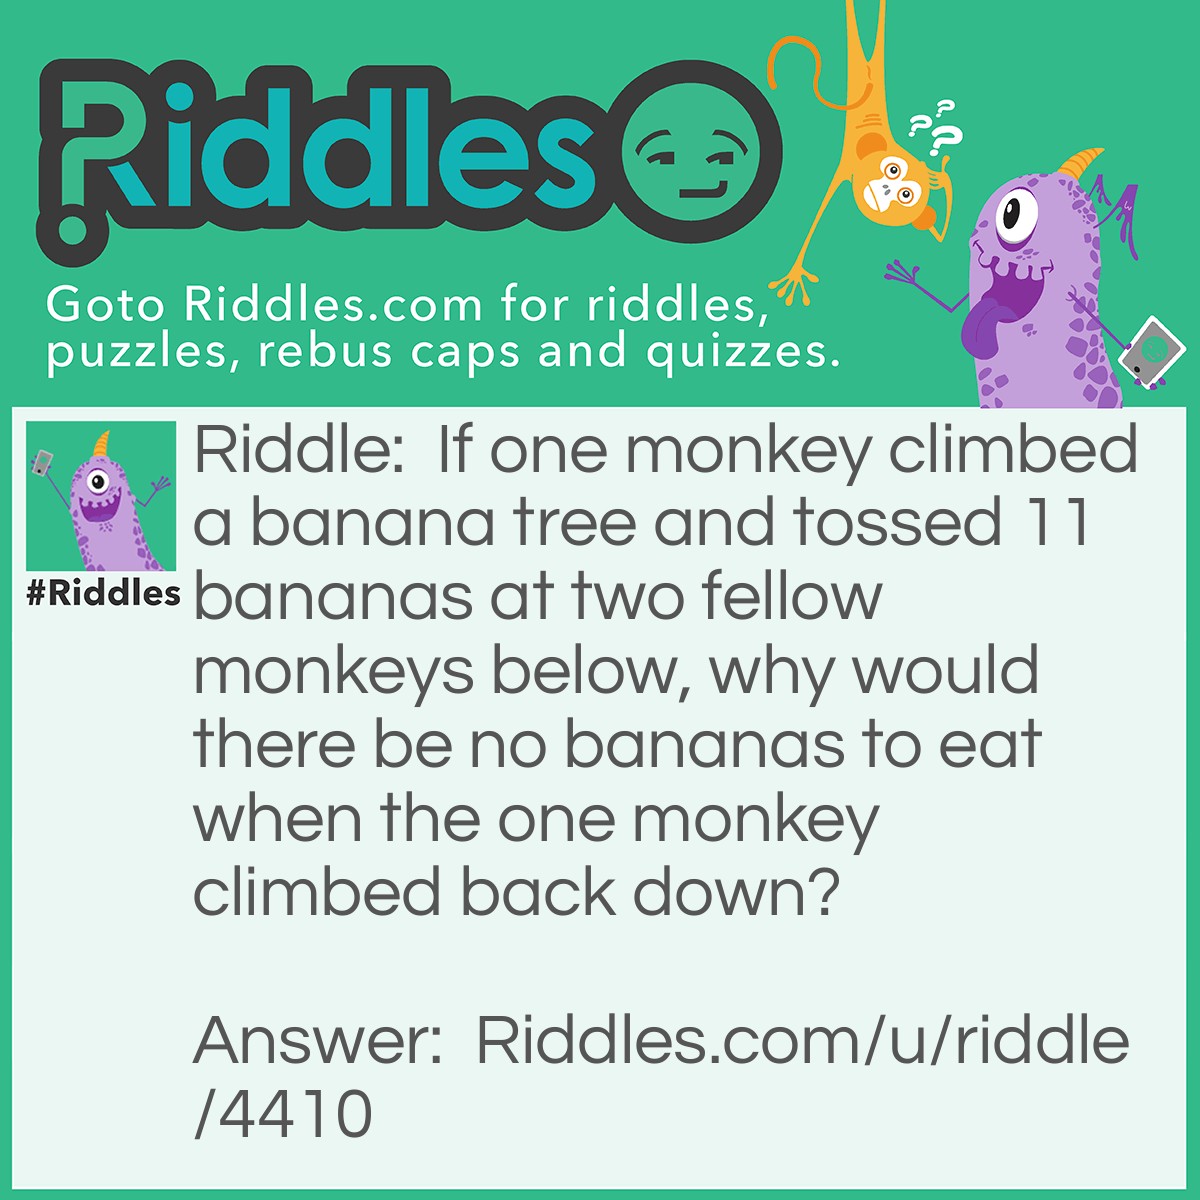 Riddle: If one monkey climbed a banana tree and tossed 11 bananas at two fellow monkeys below, why would there be no bananas to eat when the one monkey climbed back down? Answer: He was a sick monkey!